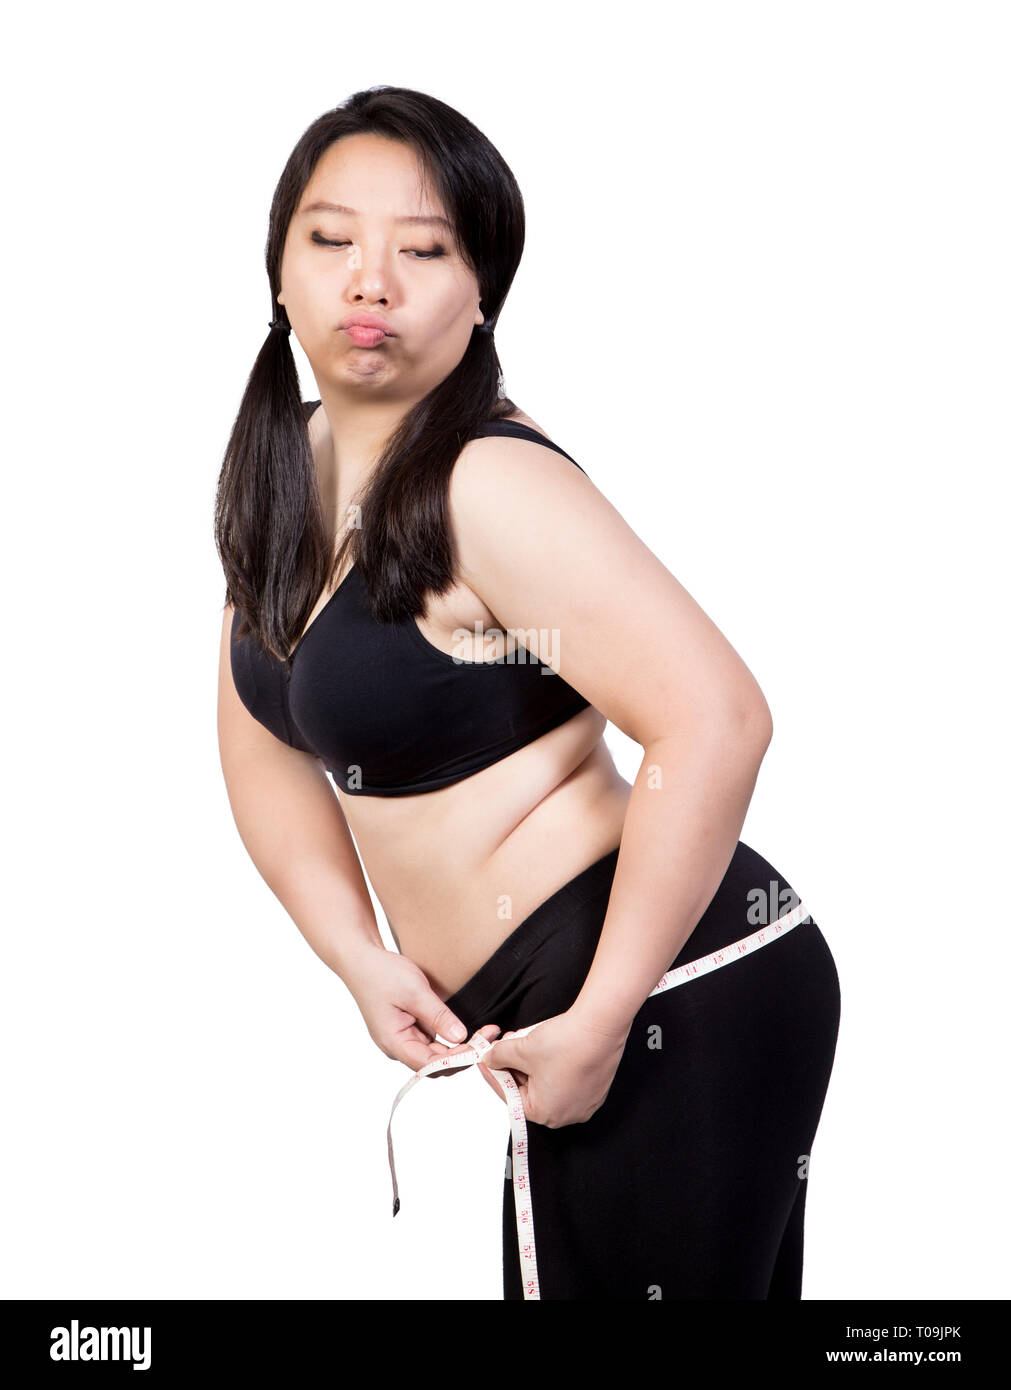 Fat Woman show overweight body tight obese by measuring tape at hip bored face weight loss concept isolated on white background Stock Photo